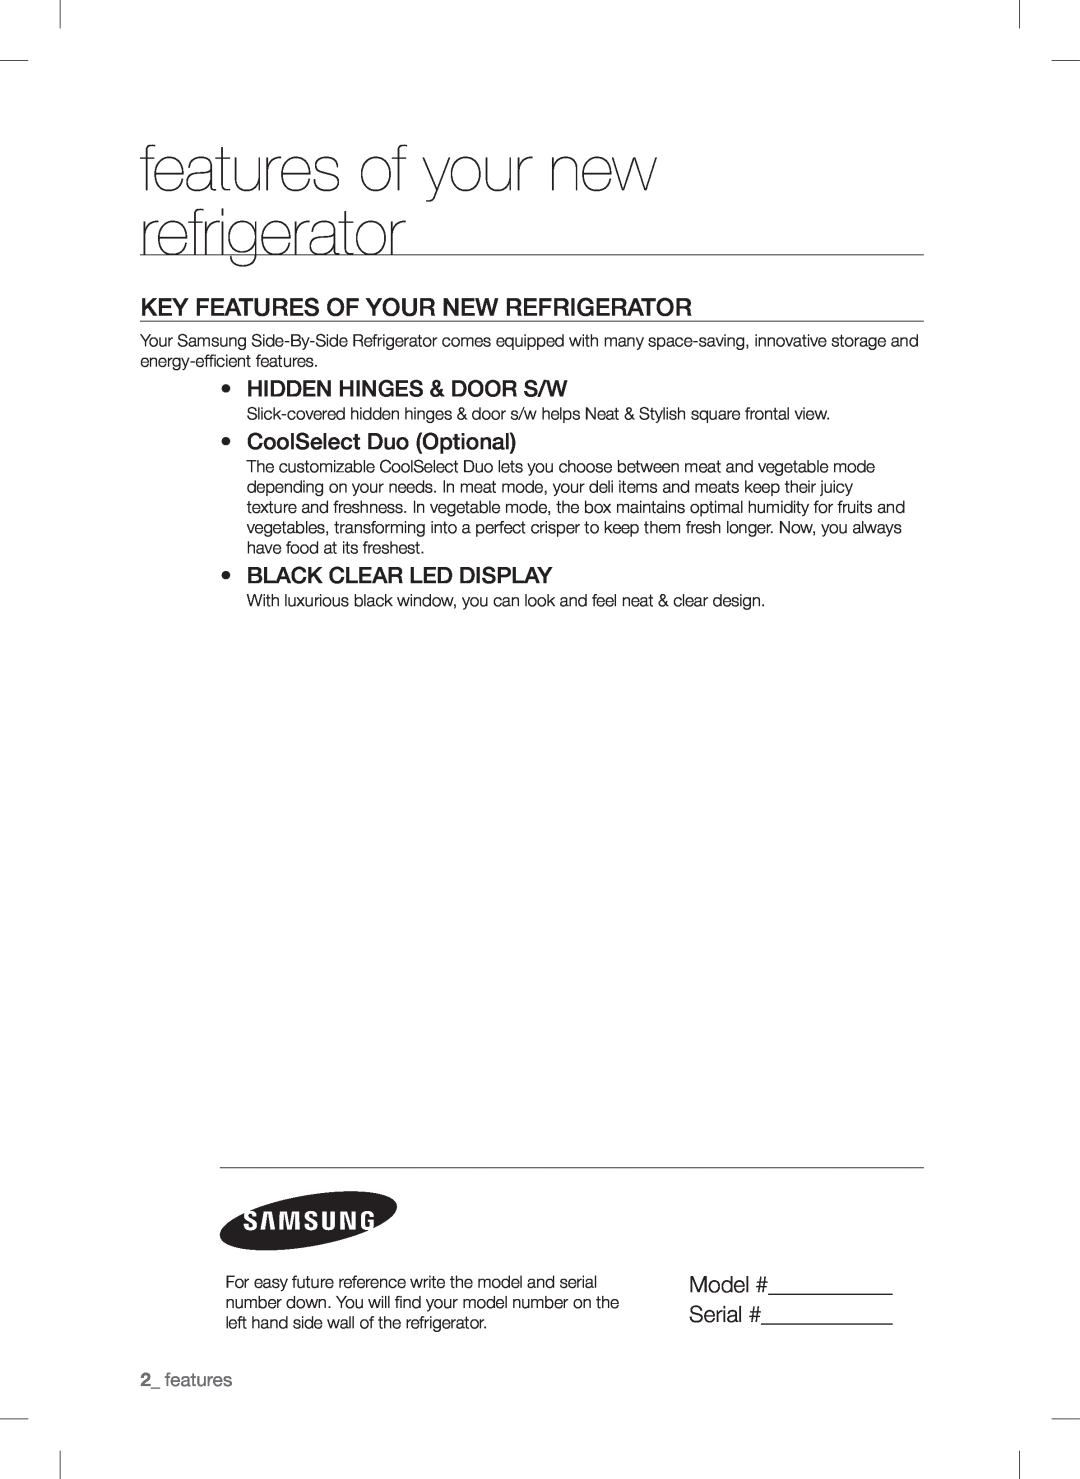 Samsung RSA1N*** Key features of your new refrigerator, Hidden Hinges & Door S/W, CoolSelect Duo Optional,  features 